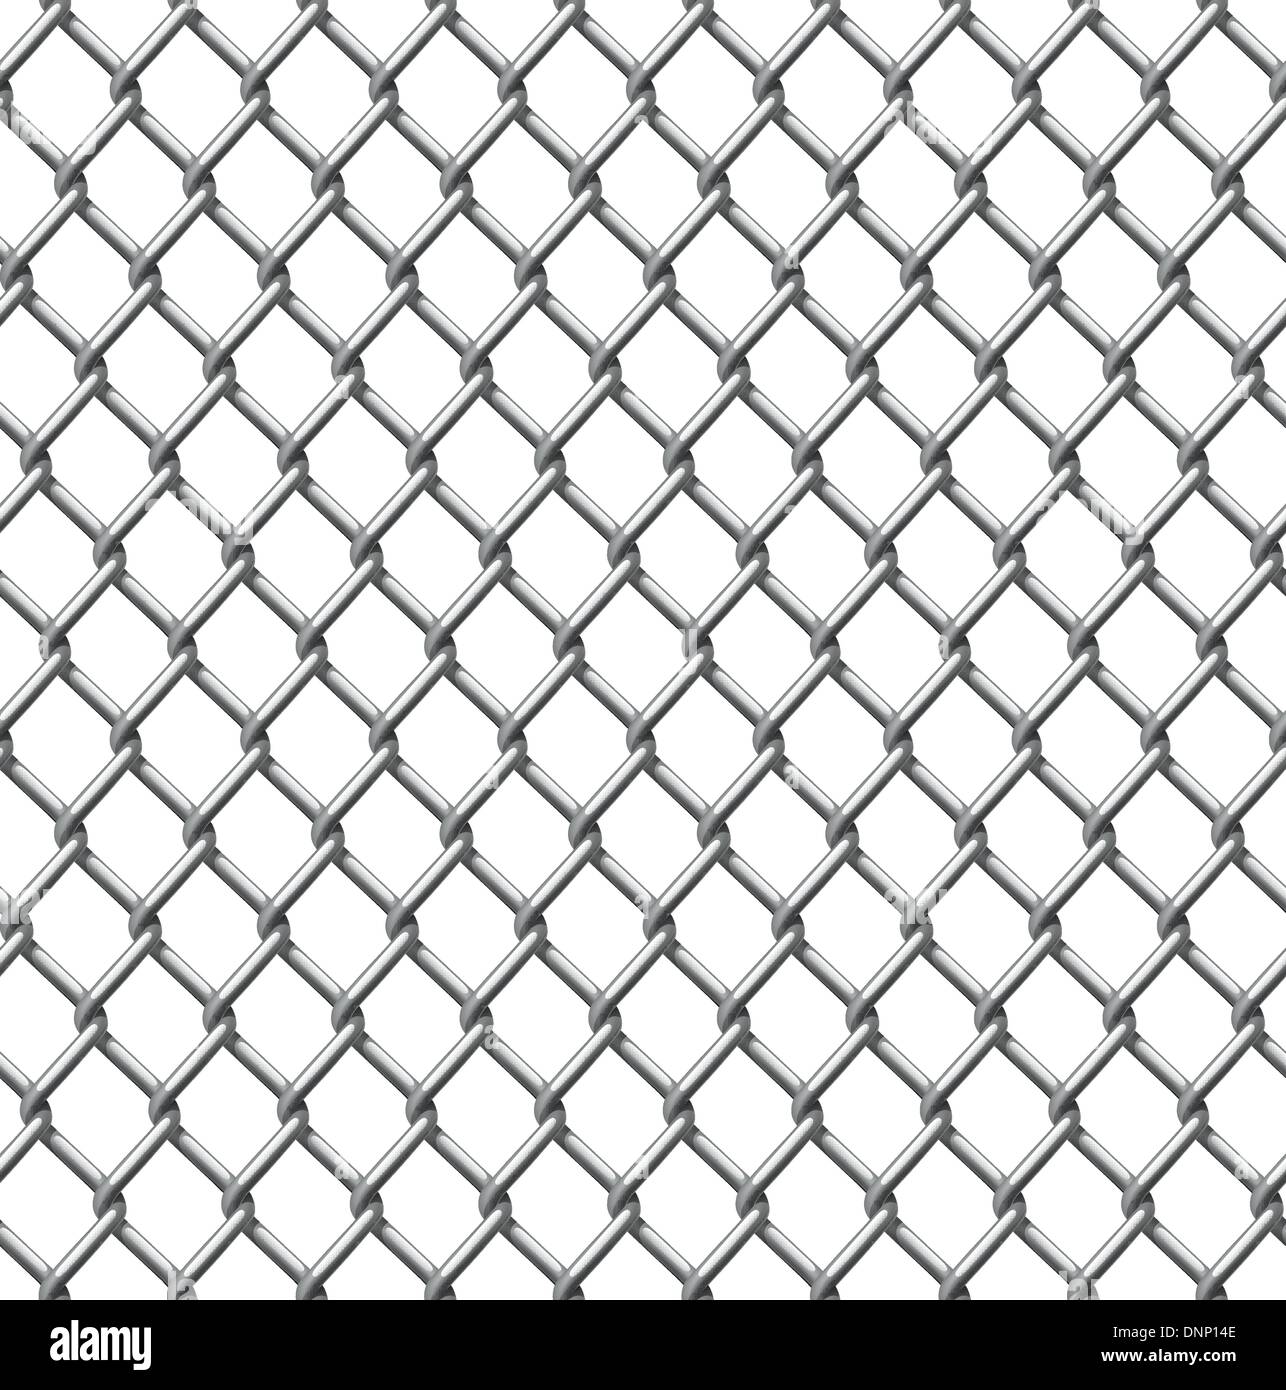 An illustration of a seamlessly tillable chain link fence pattern Stock Vector